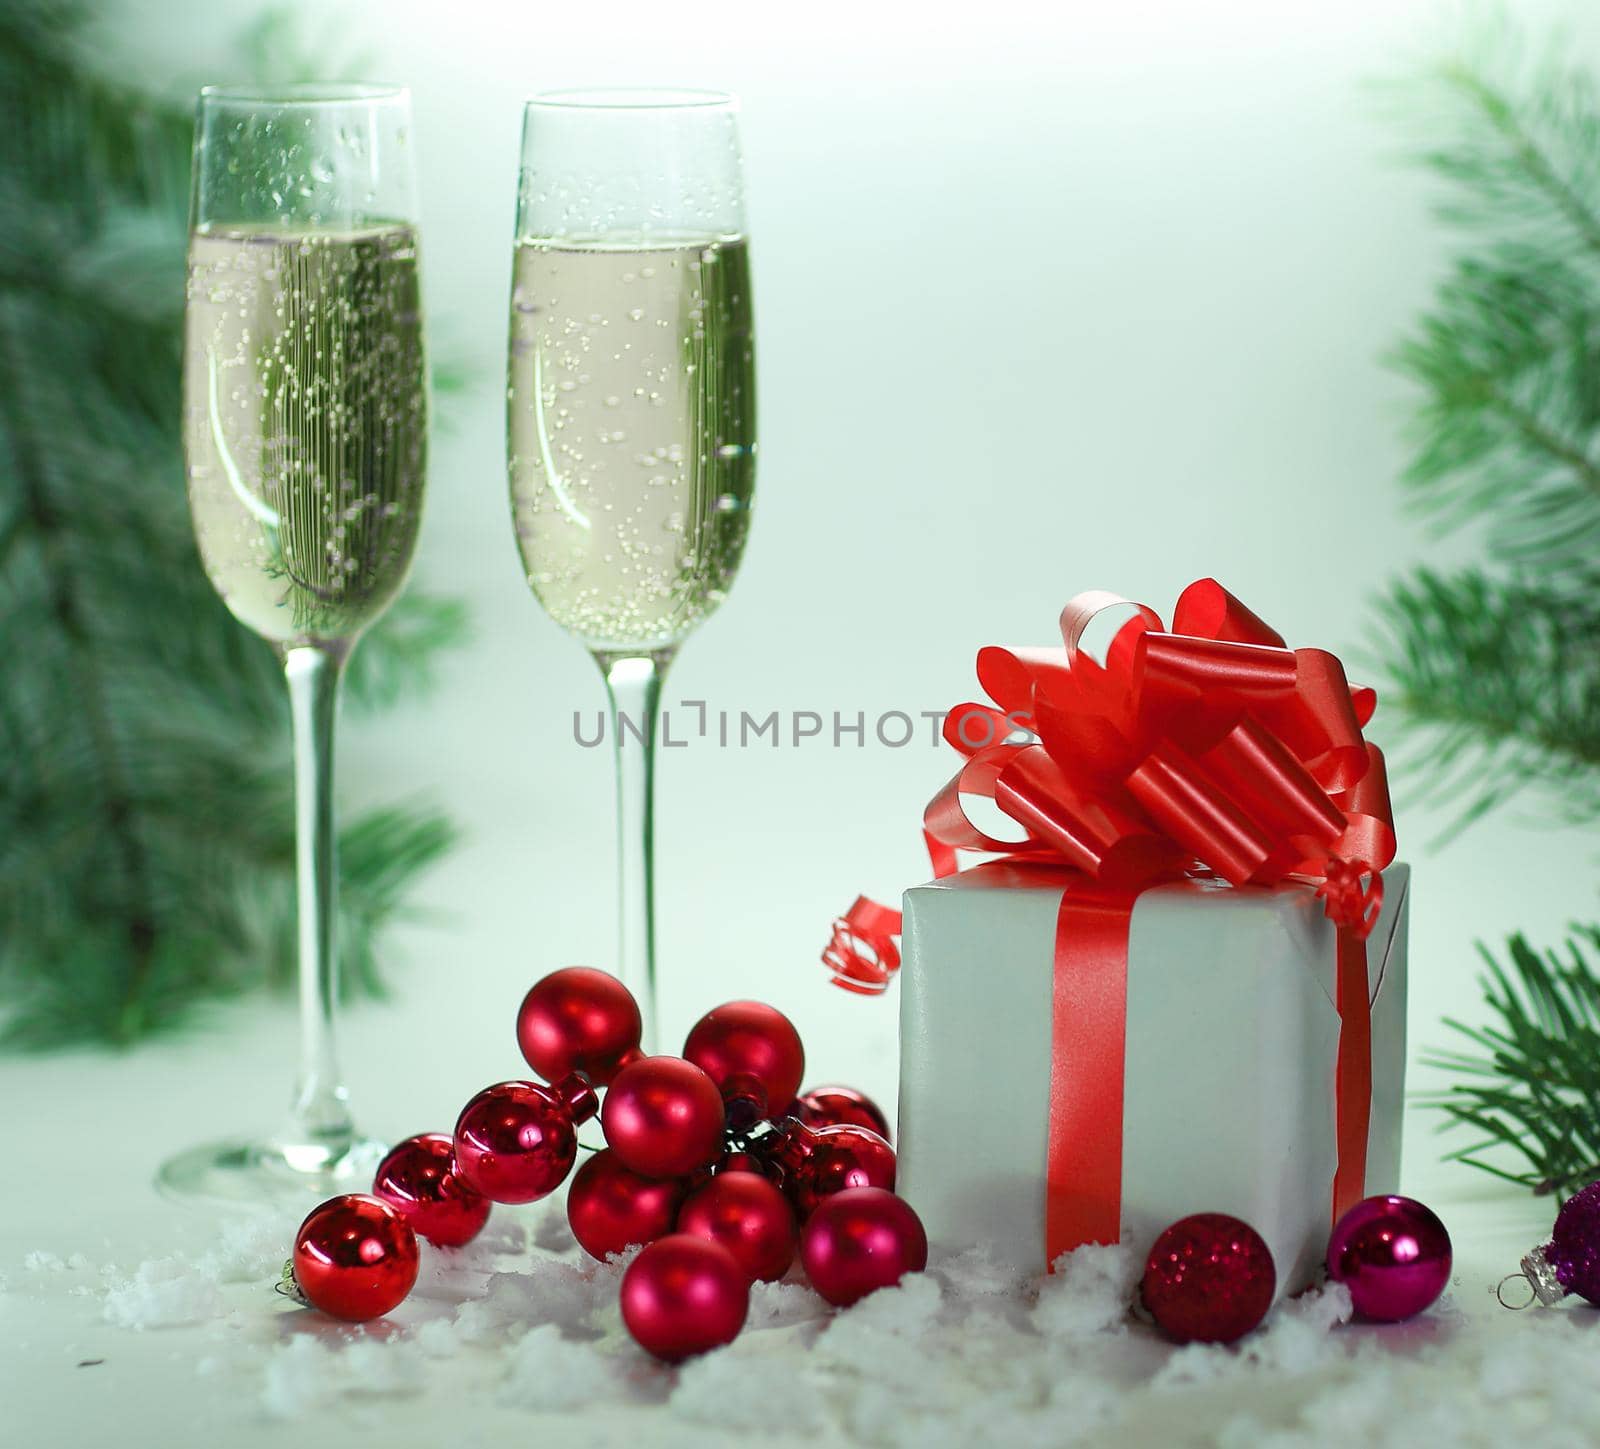 two glasses with champagne, and boxes with gifts on Christmas background .photo with copy space.